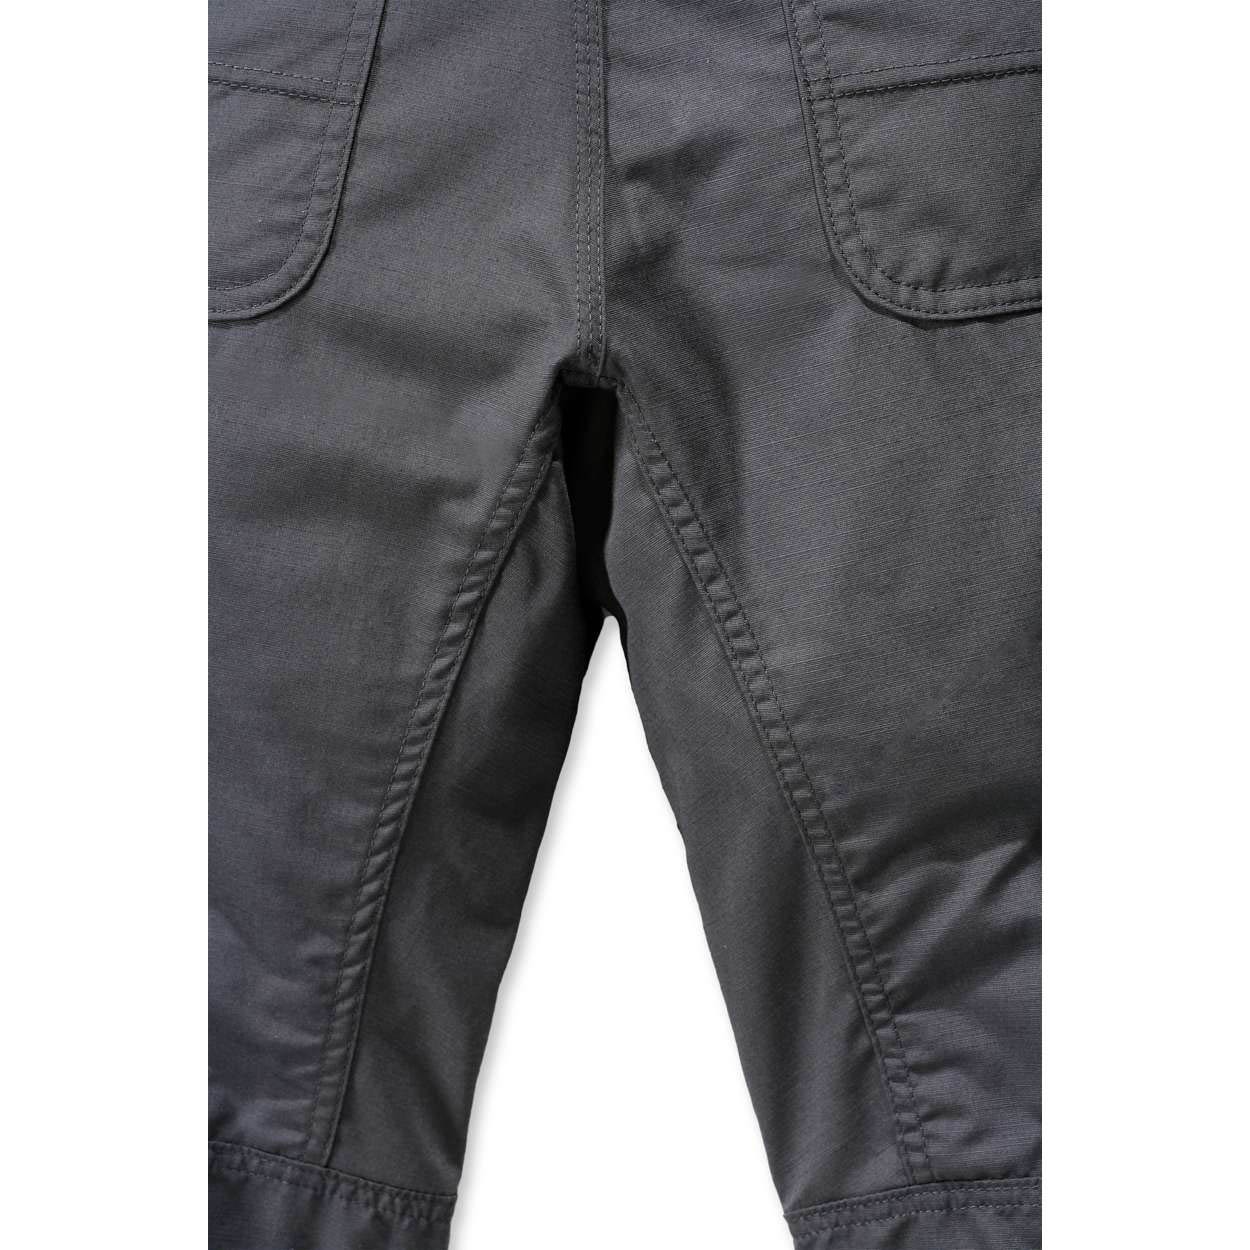 Carhartt 101964 Force Extremes Rugged Flex Pant - Work Trousers - Workwear  - Best Workwear